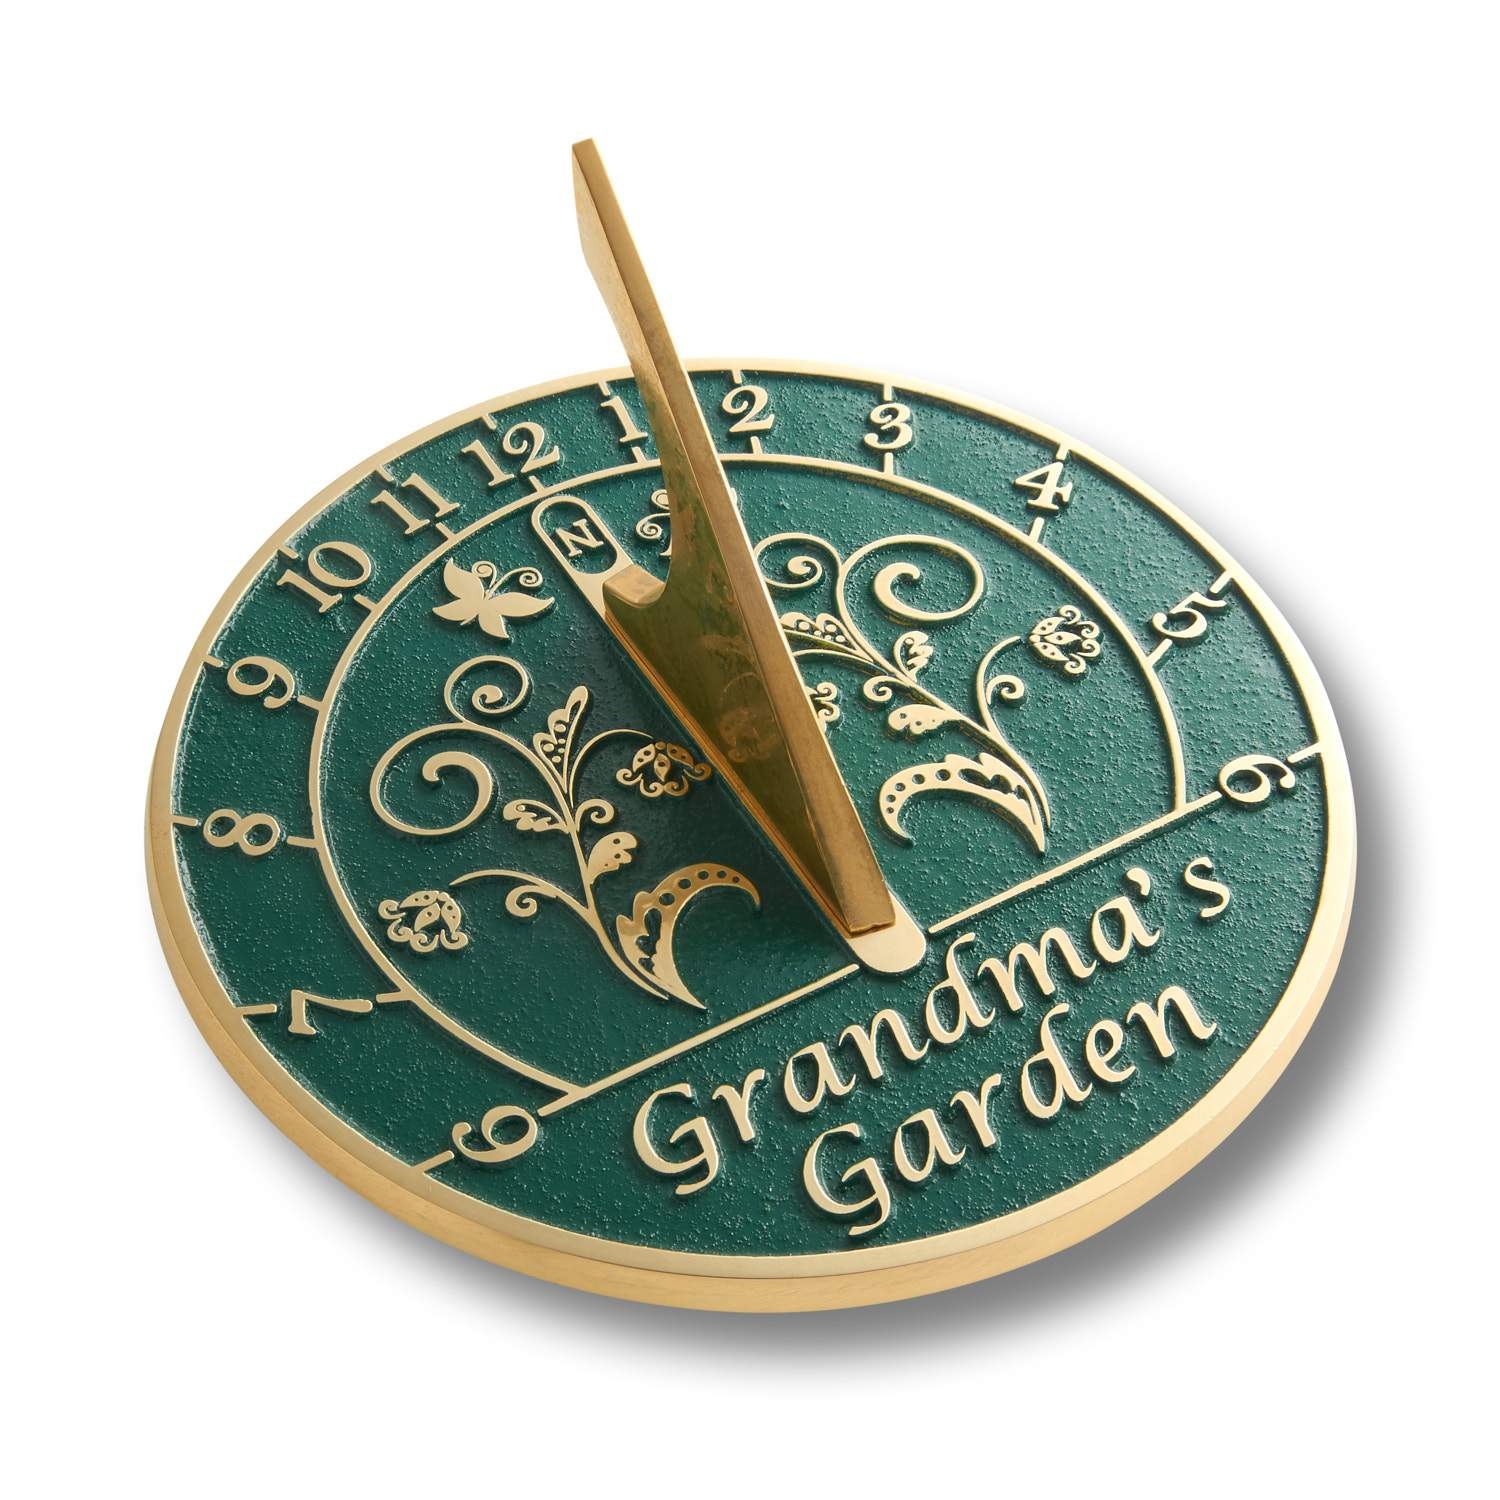 Custom Sundial Gift For Mum.  Handmade In England Just For Her With Your Own Message.